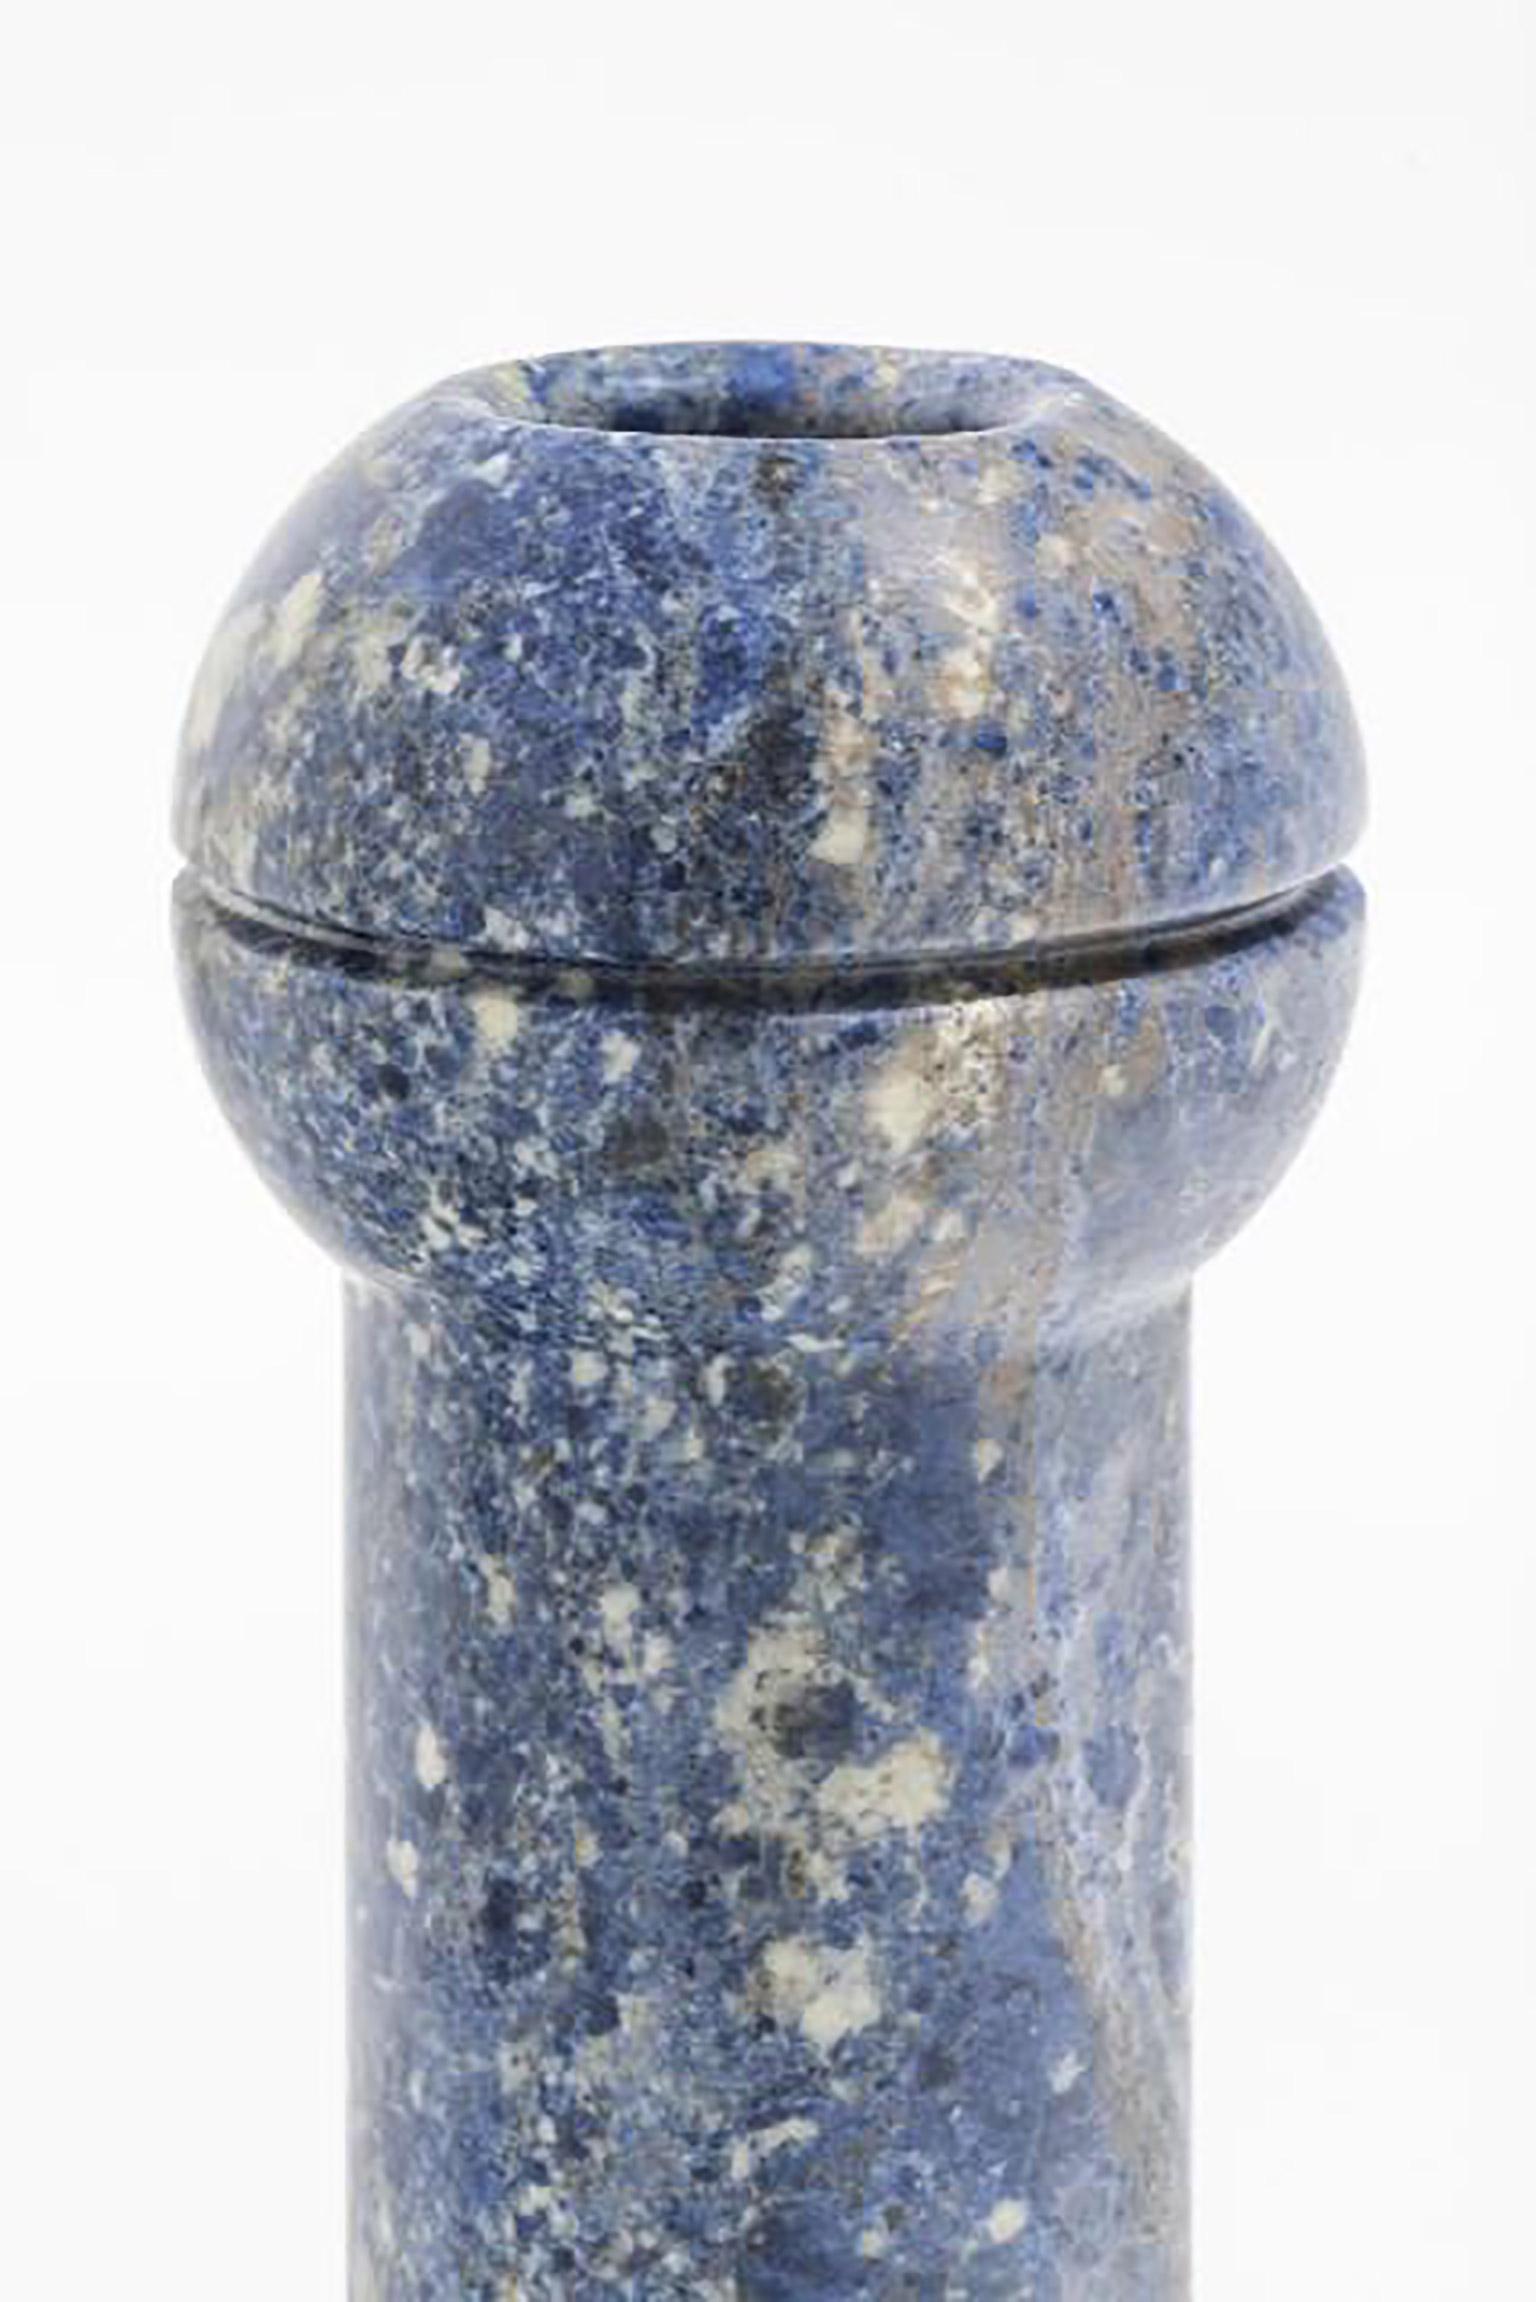 Geometric sculptural vase in Sodalite marble, Simultanea collection. Centripetal, centrifugal, and movement forces are channeled into stone forms, and rotation on the axis become a vase, while an inclined cut suggests a container. Like a mechanical